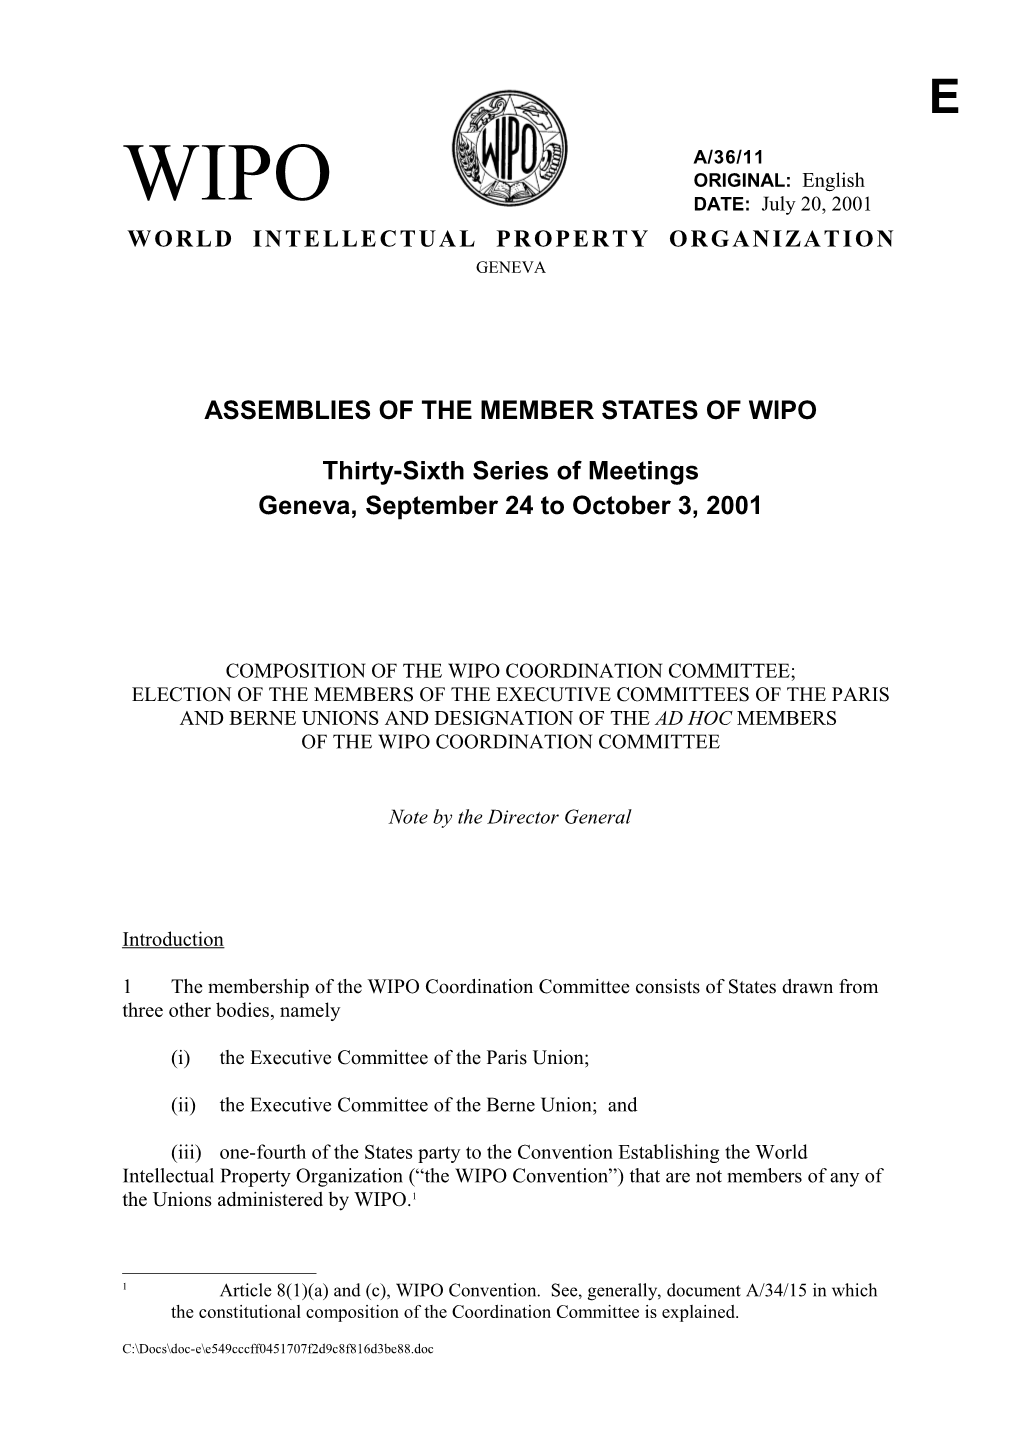 A/36/11: Composition of the WIPO Coordination Committee; Election of the Members of The